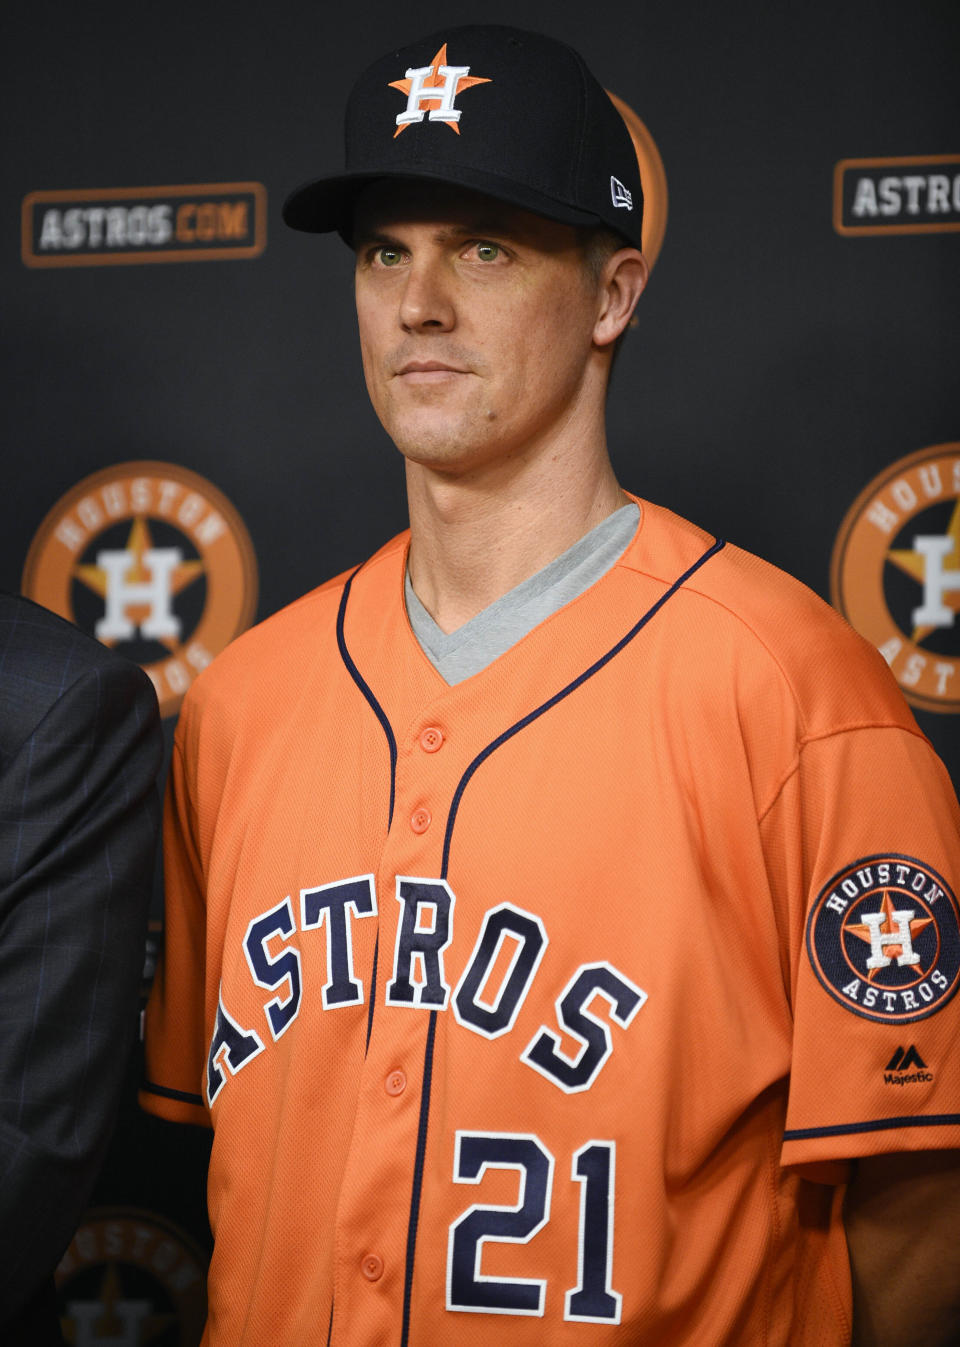 Houston Astros pitcher Zack Greinke stands after a news conference before a baseball game against the Seattle Mariners, Friday, Aug. 2, 2019, in Houston. Greinke was acquired via a trade with the Arizona Diamondbacks on July 31. (AP Photo/Eric Christian Smith)